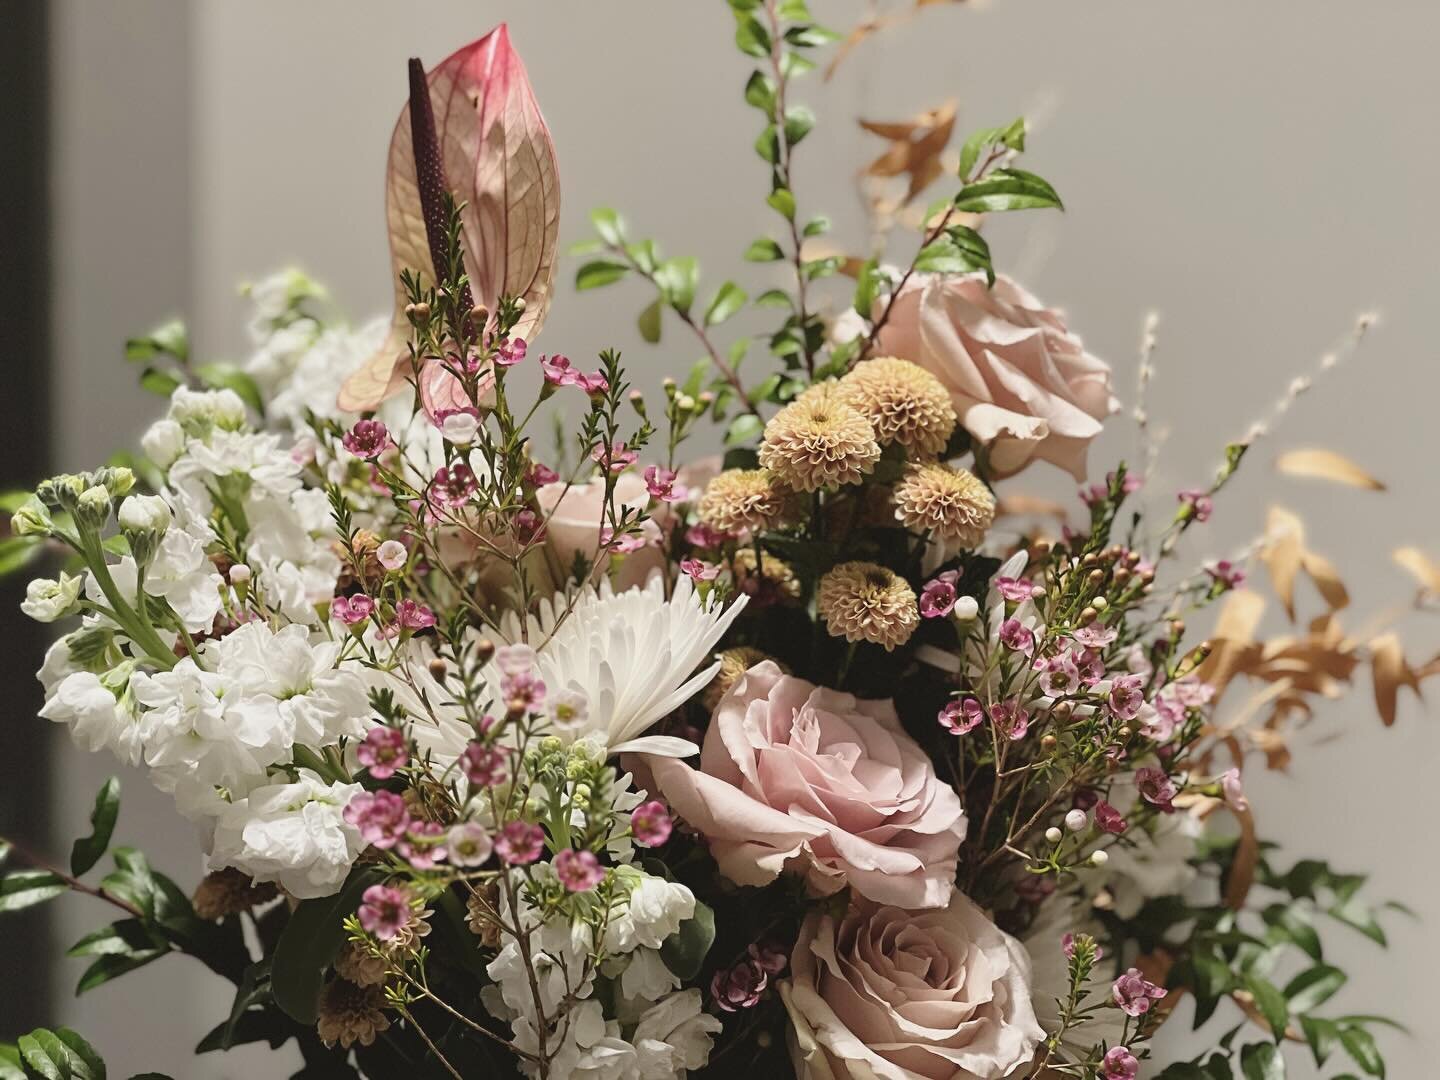 Another year, another gorgeous bouquet. Made by @vivavoceflowerco .